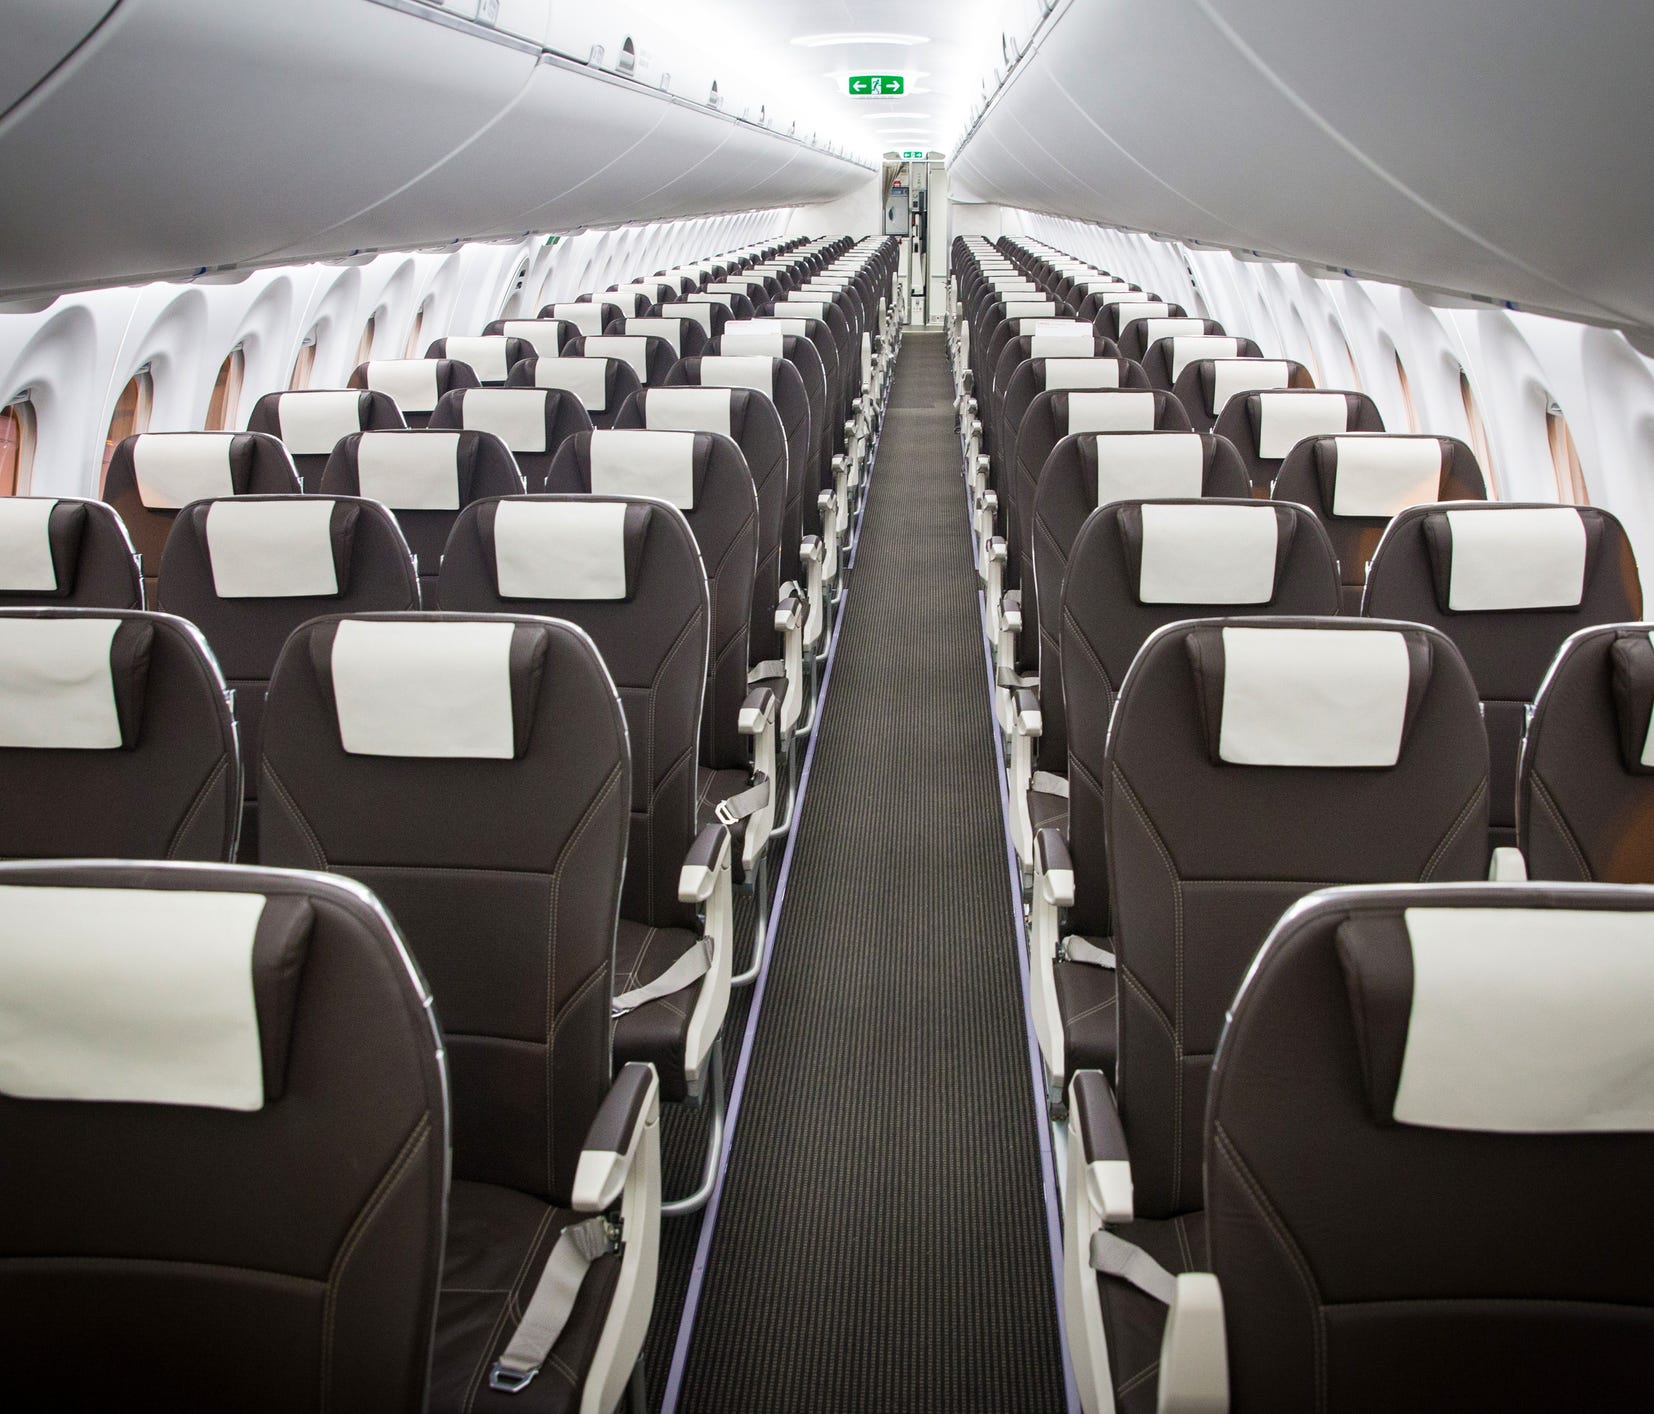 Airplanes with 3–2 seating in the main cabin fly normally with no imbalance due to good design engineering.